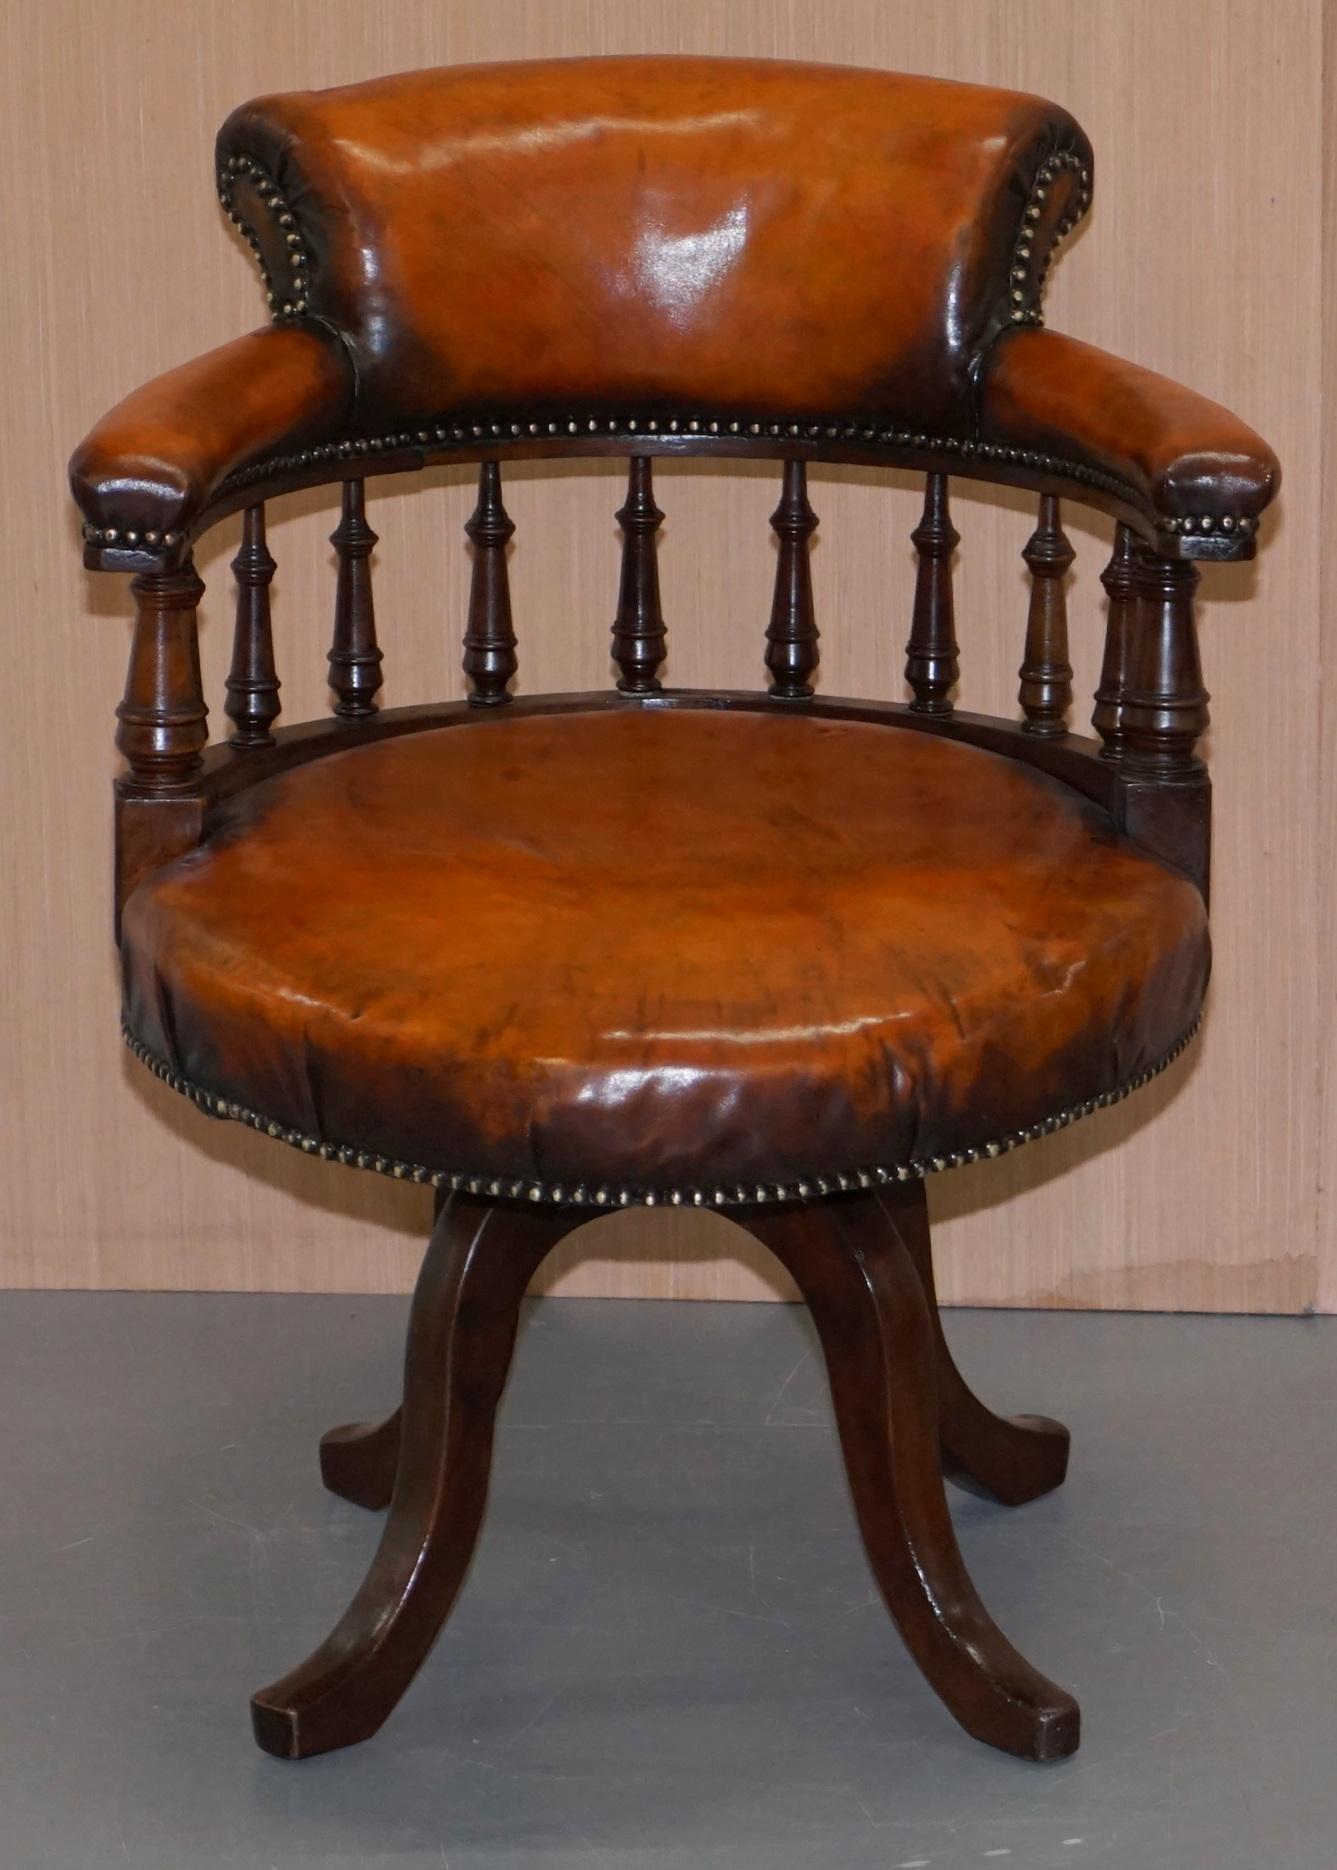 We are delighted to offer for sale this absolutely stunning fully restored hand dyed aged brown leather early Victorian ships captains chair

This chair is just about as fine as you find anywhere, it has been upholstered with premium natural